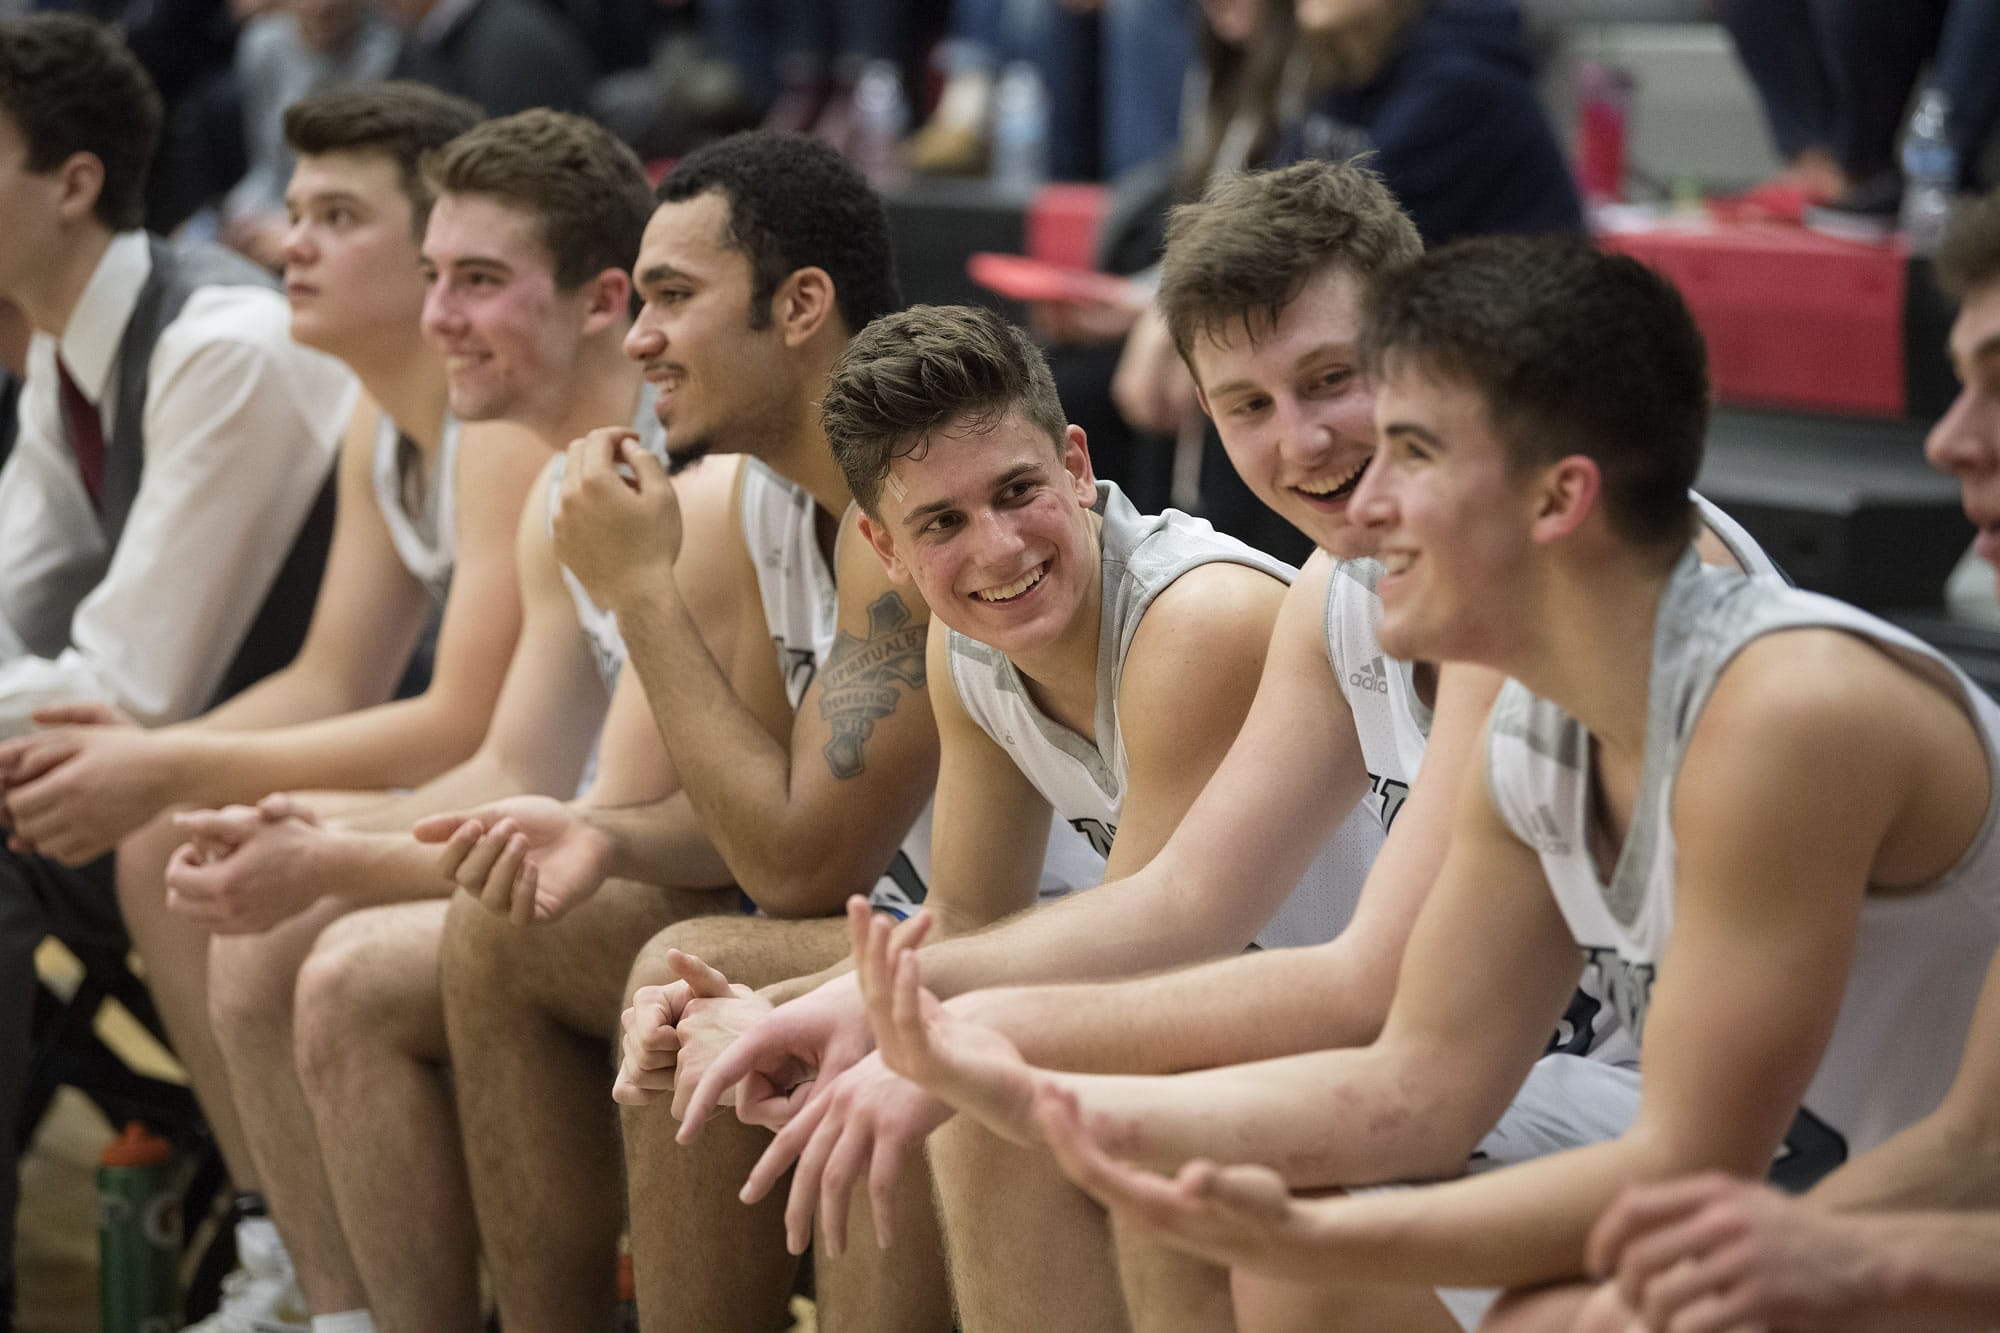 Players are all smiles on the sidelines at the end of the fourth quarter against Olympia at Union High School on Thursday night, Feb. 9, 2017.